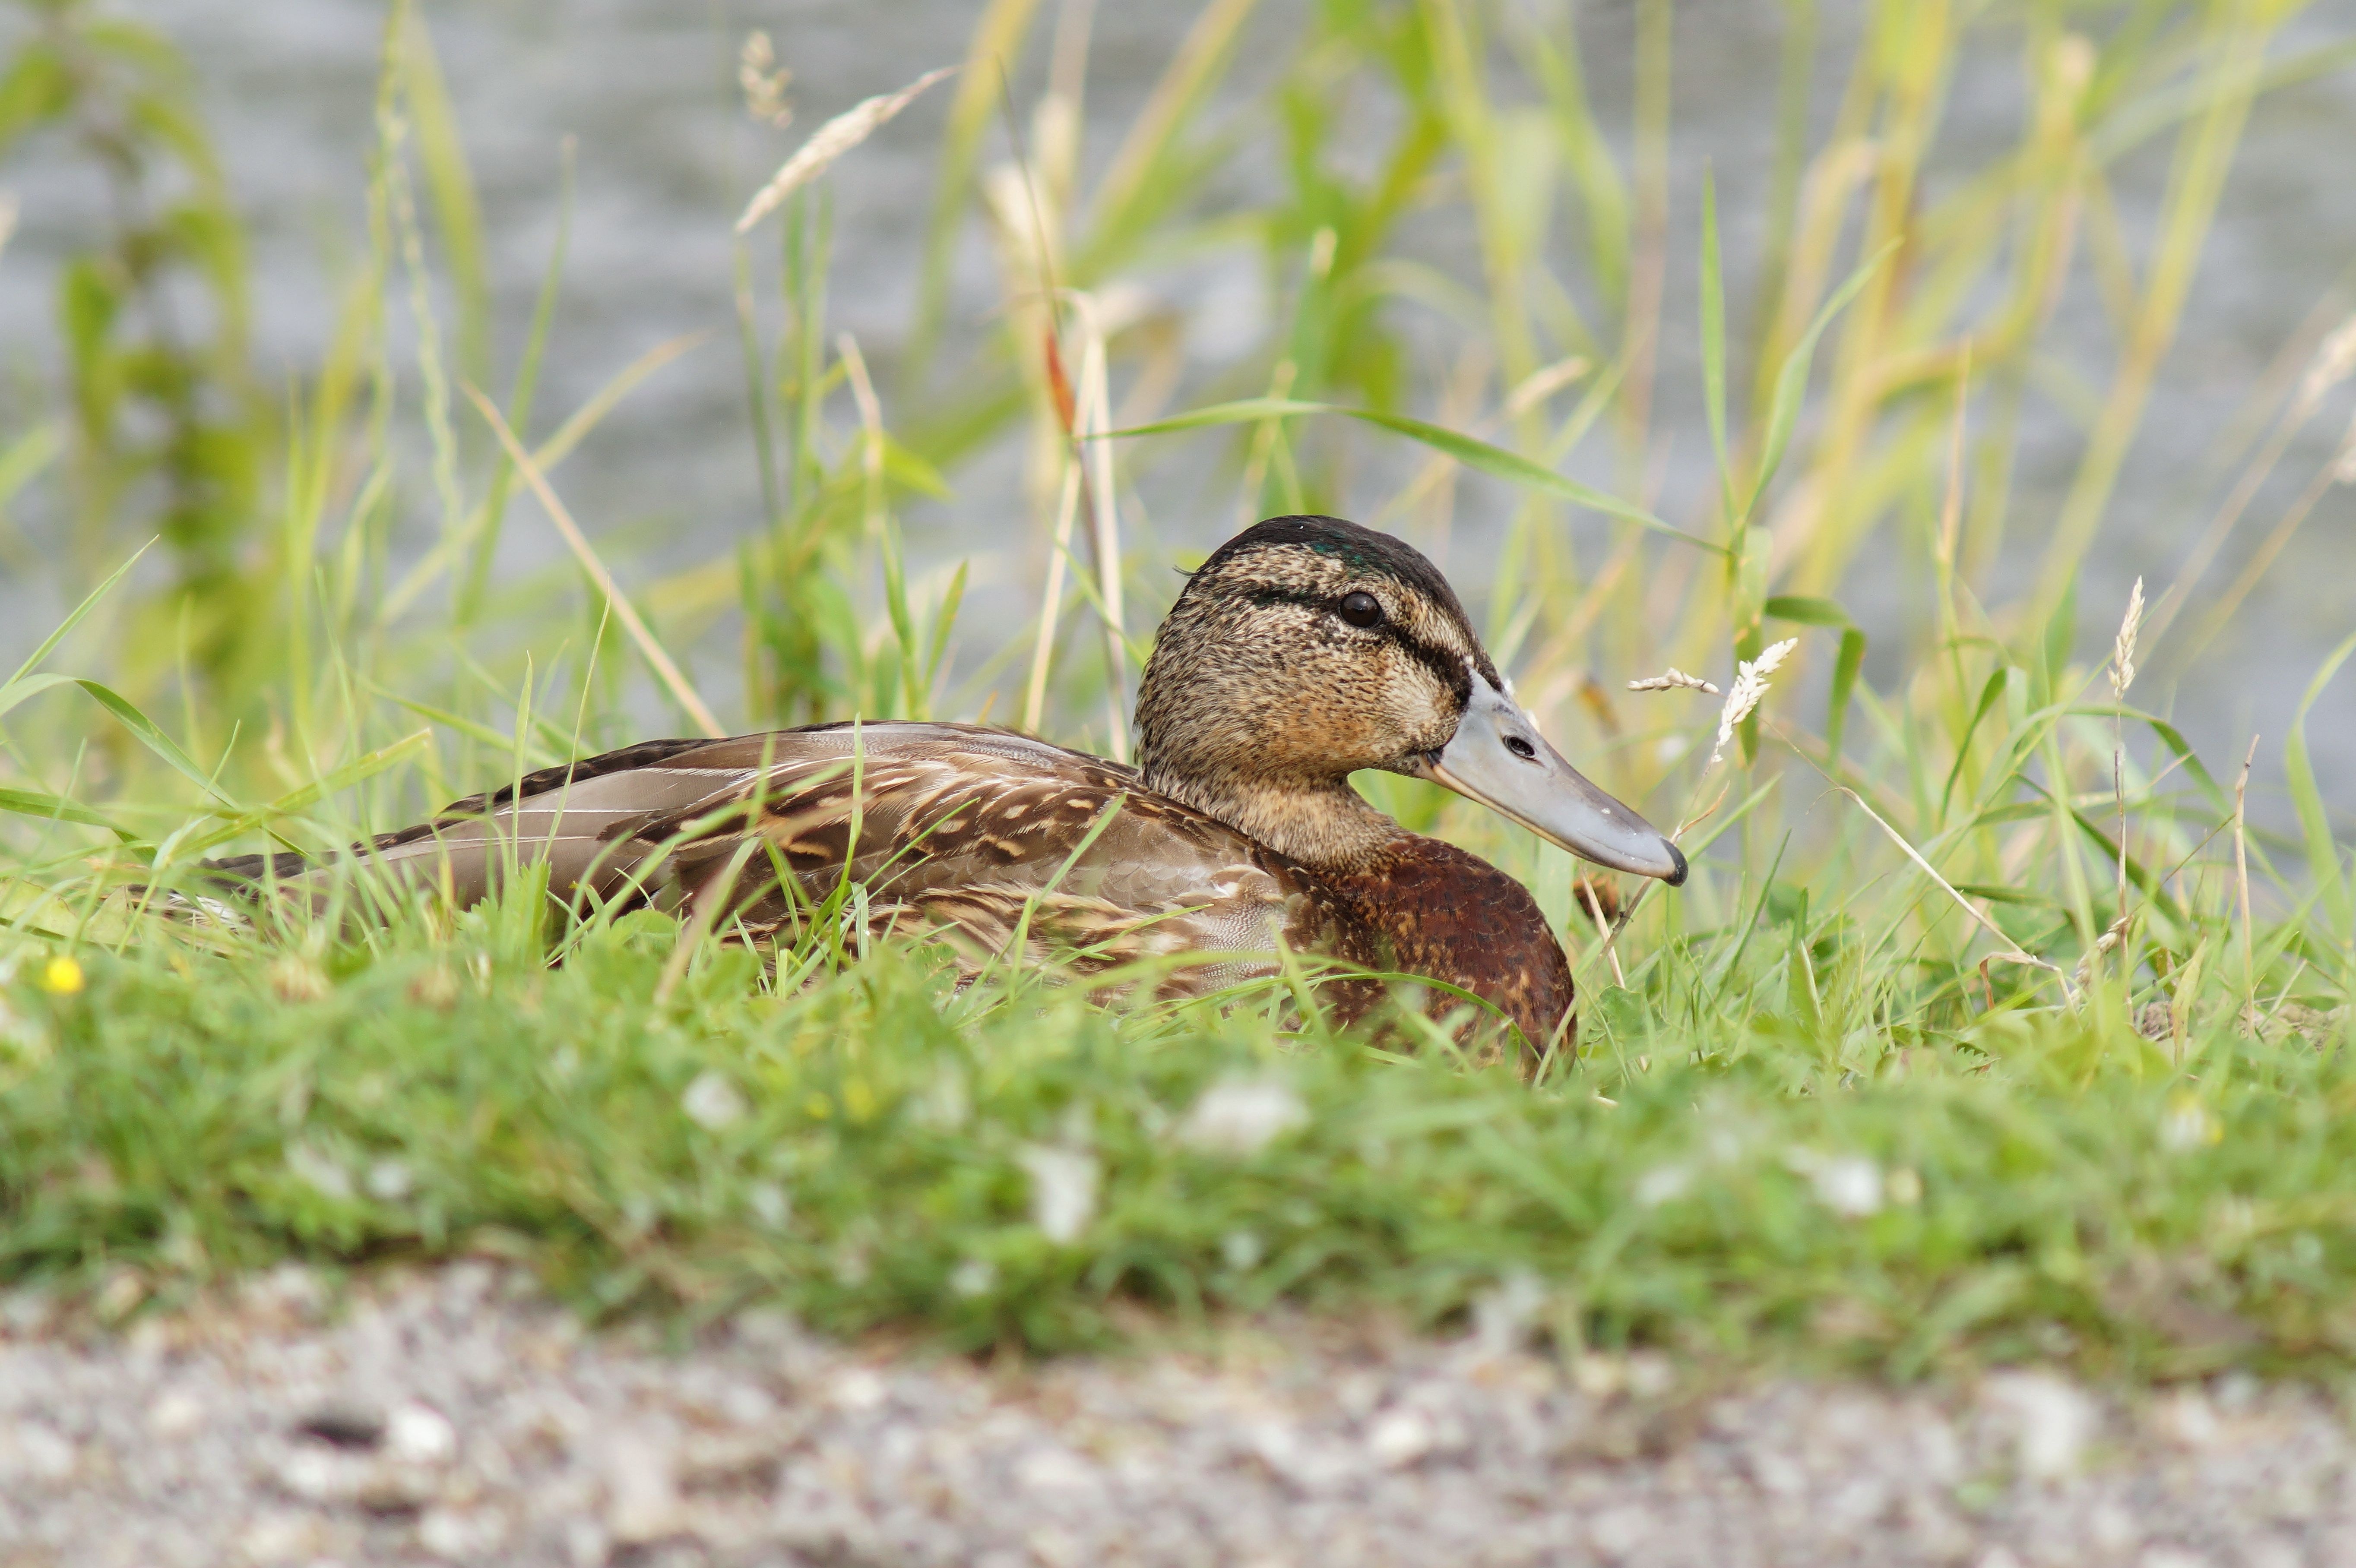 brown and black duck on grass ground